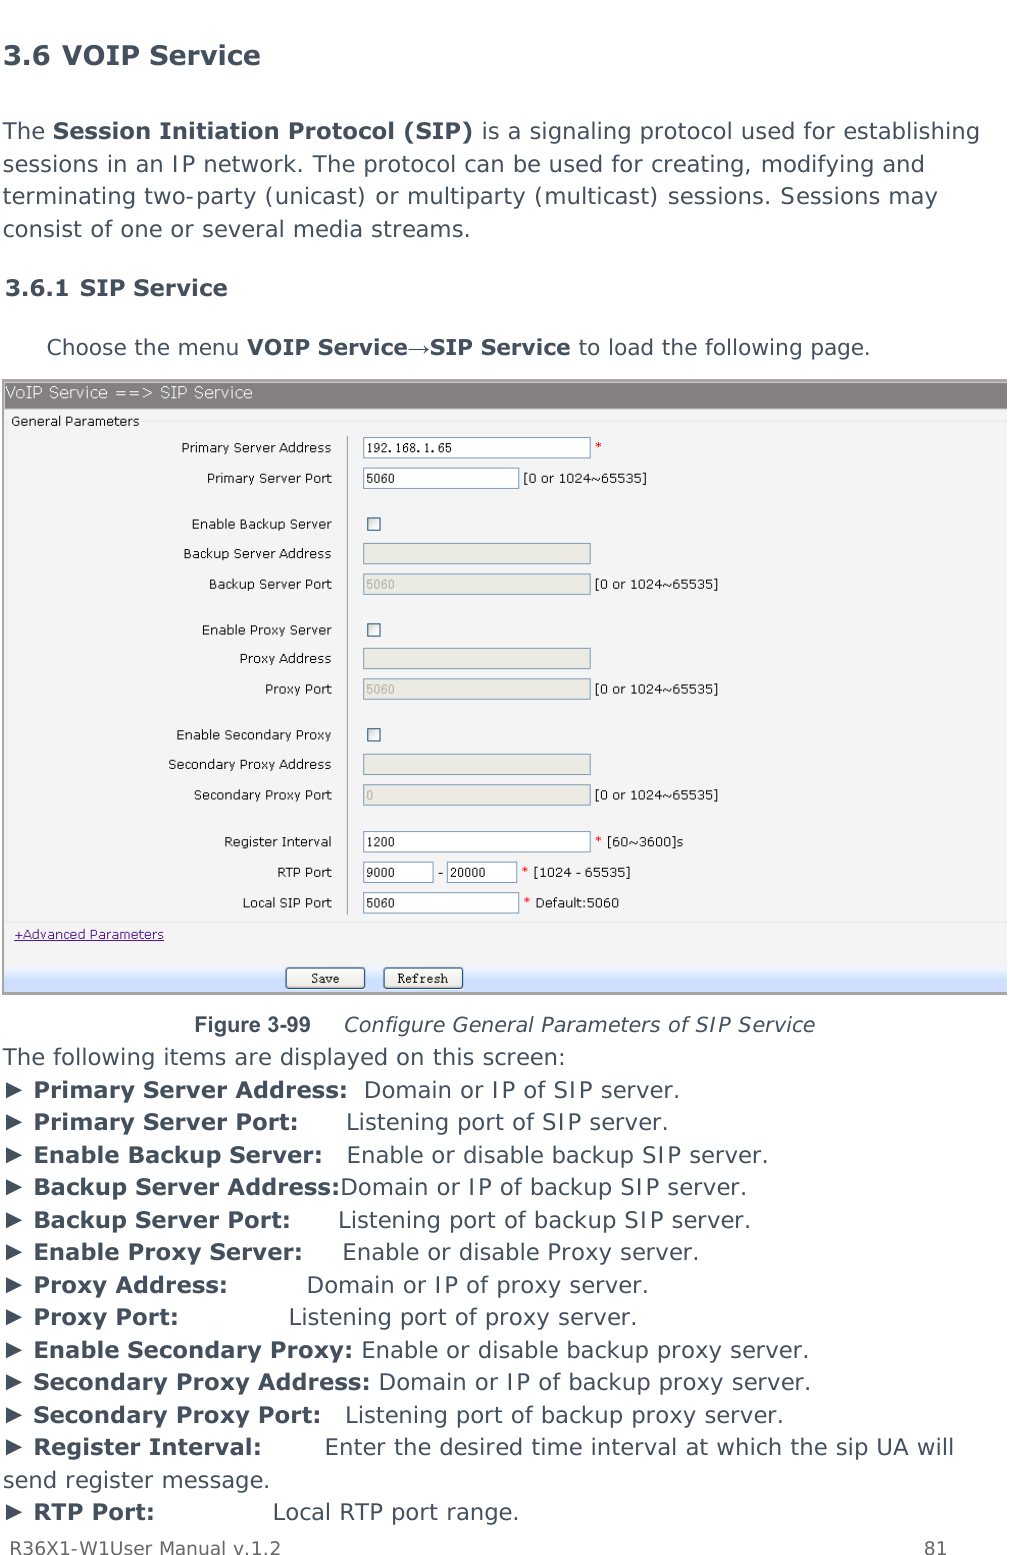           R36X1-W1User Manual v.1.2    81  3.6 VOIP Service The Session Initiation Protocol (SIP) is a signaling protocol used for establishing sessions in an IP network. The protocol can be used for creating, modifying and terminating two-party (unicast) or multiparty (multicast) sessions. Sessions may consist of one or several media streams. 3.6.1 SIP Service Choose the menu VOIP Service→SIP Service to load the following page.  Figure 3-99  Configure General Parameters of SIP Service The following items are displayed on this screen: ► Primary Server Address:  Domain or IP of SIP server. ► Primary Server Port:      Listening port of SIP server. ► Enable Backup Server:   Enable or disable backup SIP server. ► Backup Server Address:Domain or IP of backup SIP server. ► Backup Server Port:      Listening port of backup SIP server. ► Enable Proxy Server:     Enable or disable Proxy server. ► Proxy Address:          Domain or IP of proxy server. ► Proxy Port:              Listening port of proxy server. ► Enable Secondary Proxy: Enable or disable backup proxy server. ► Secondary Proxy Address: Domain or IP of backup proxy server. ► Secondary Proxy Port:   Listening port of backup proxy server. ► Register Interval:        Enter the desired time interval at which the sip UA will send register message. ► RTP Port:               Local RTP port range. 